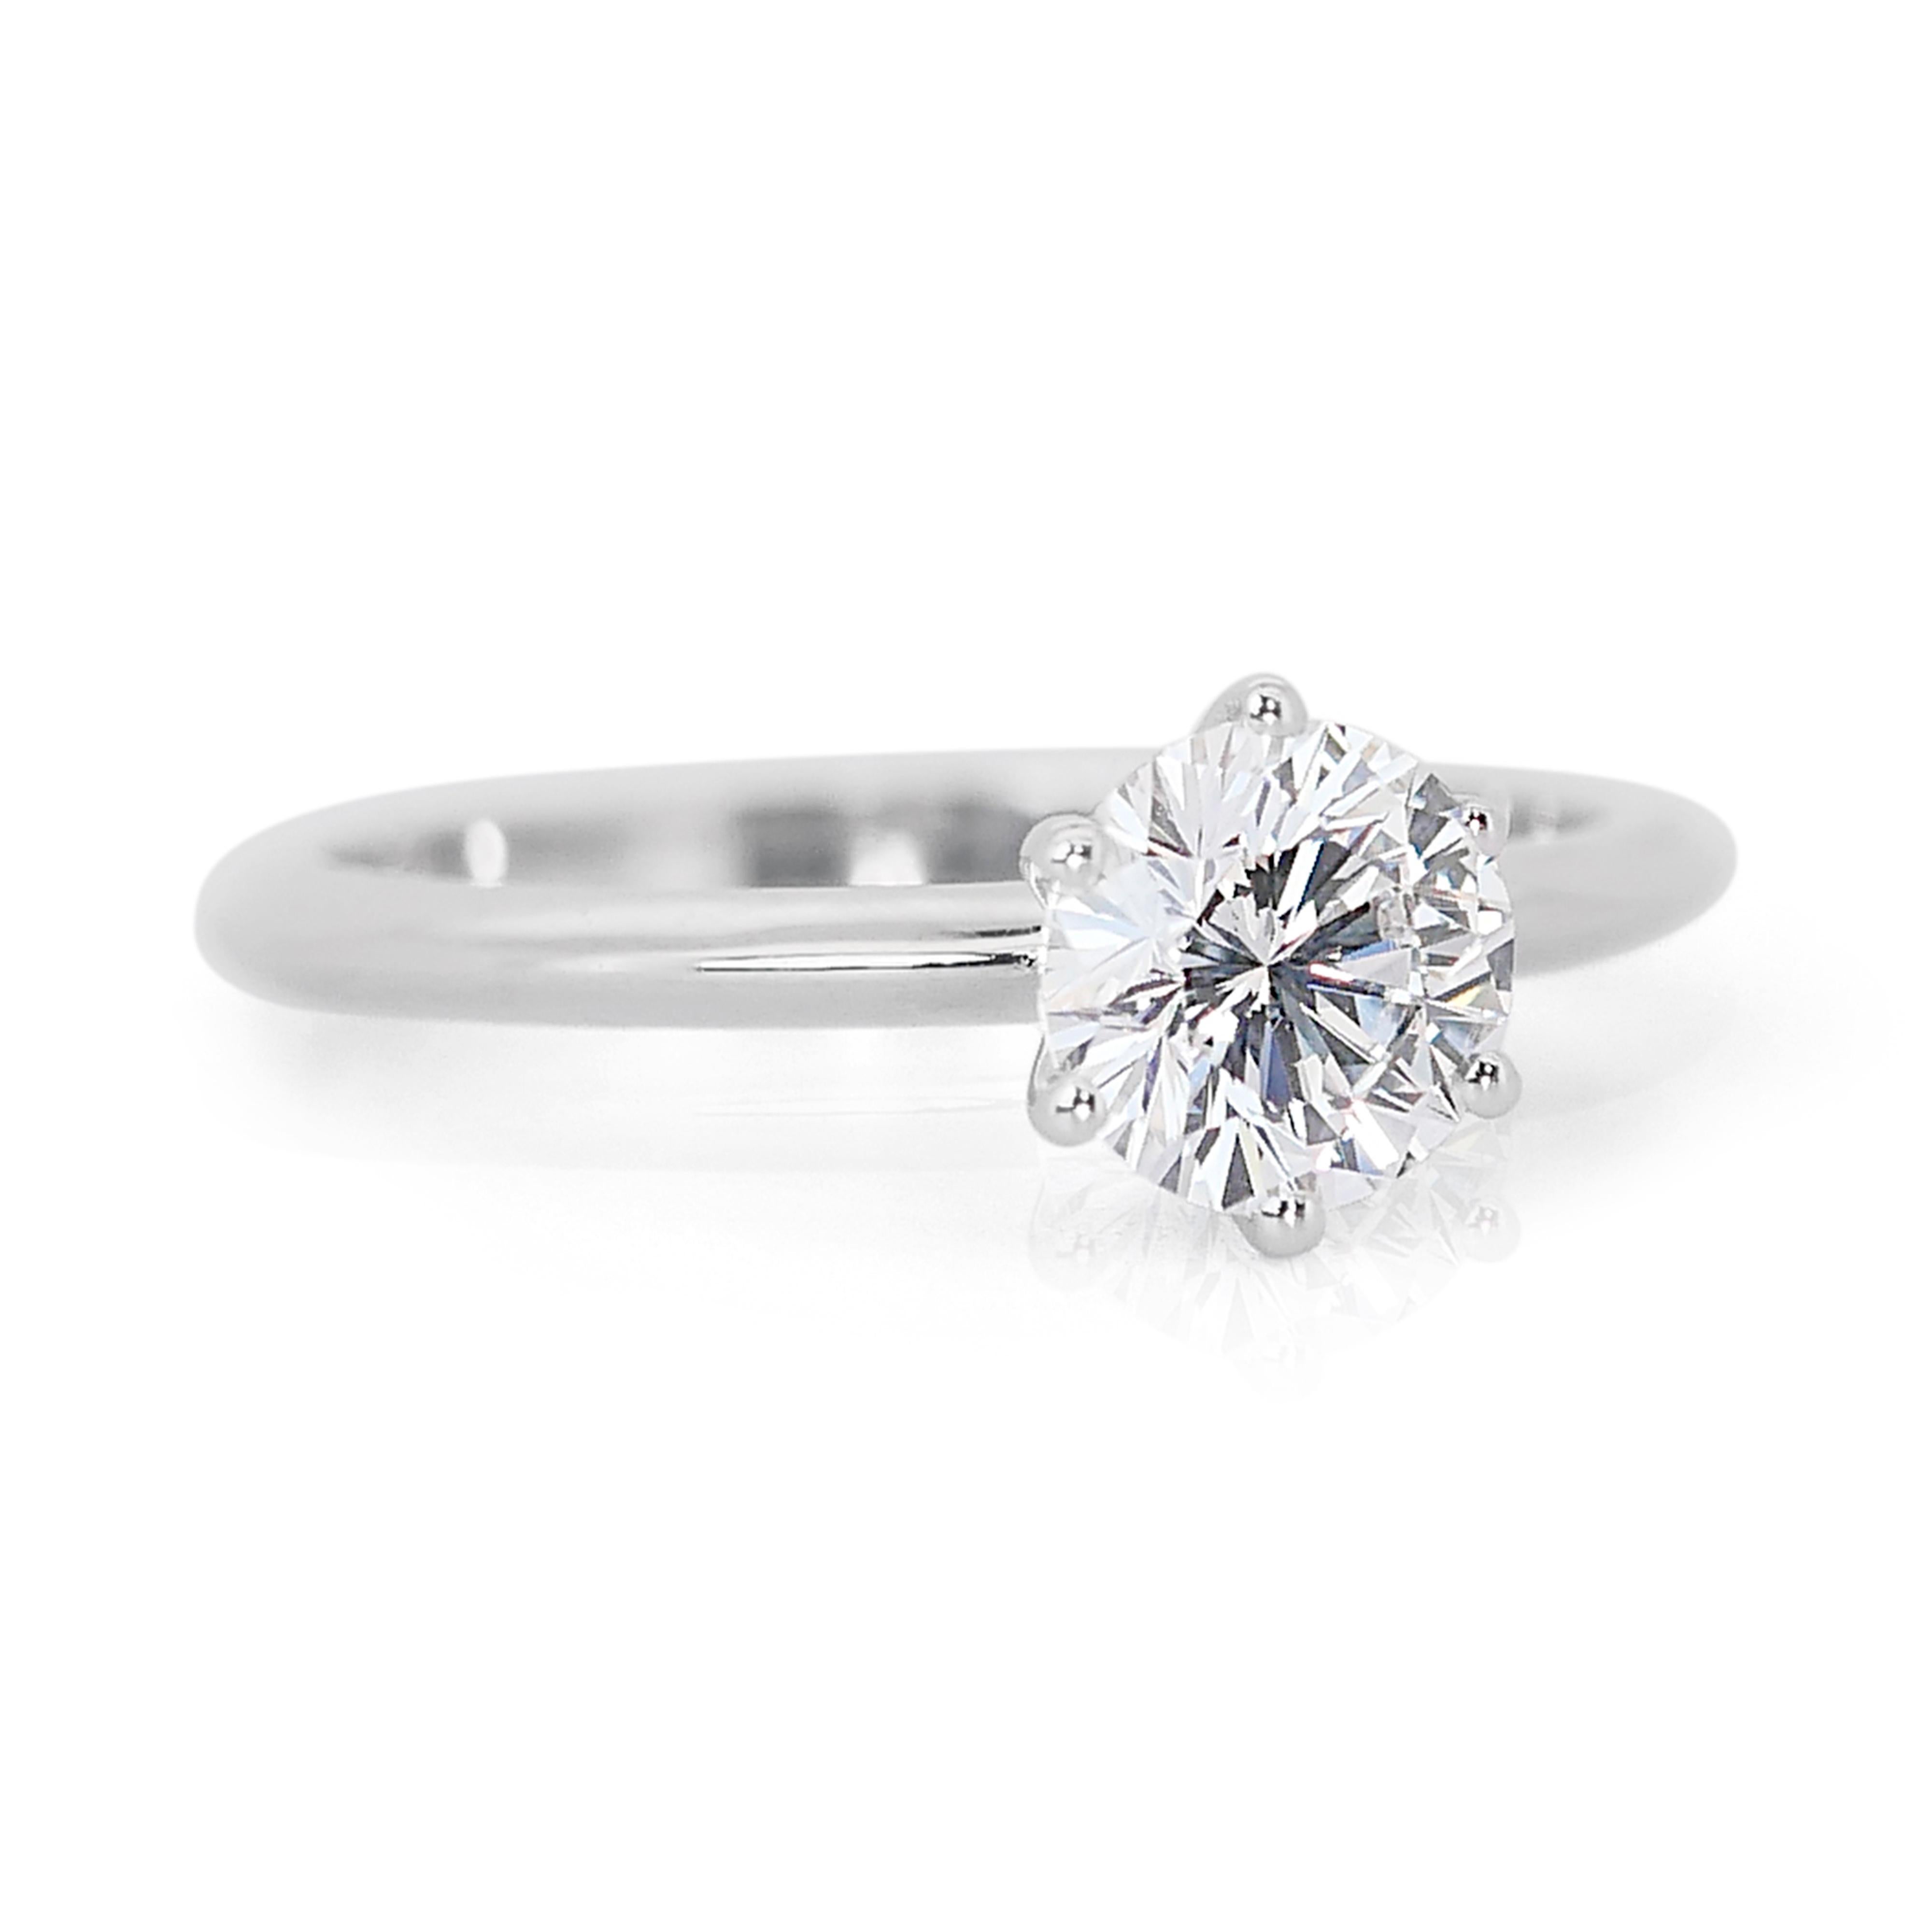 Classic 18k White Gold Diamond Solitaire Ring w/0.54 ct - GIA Certified

This classic 18k white gold solitaire ring is the epitome of timeless elegance, featuring a single round diamond that radiates pure sophistication. The centerpiece, with a 0.54